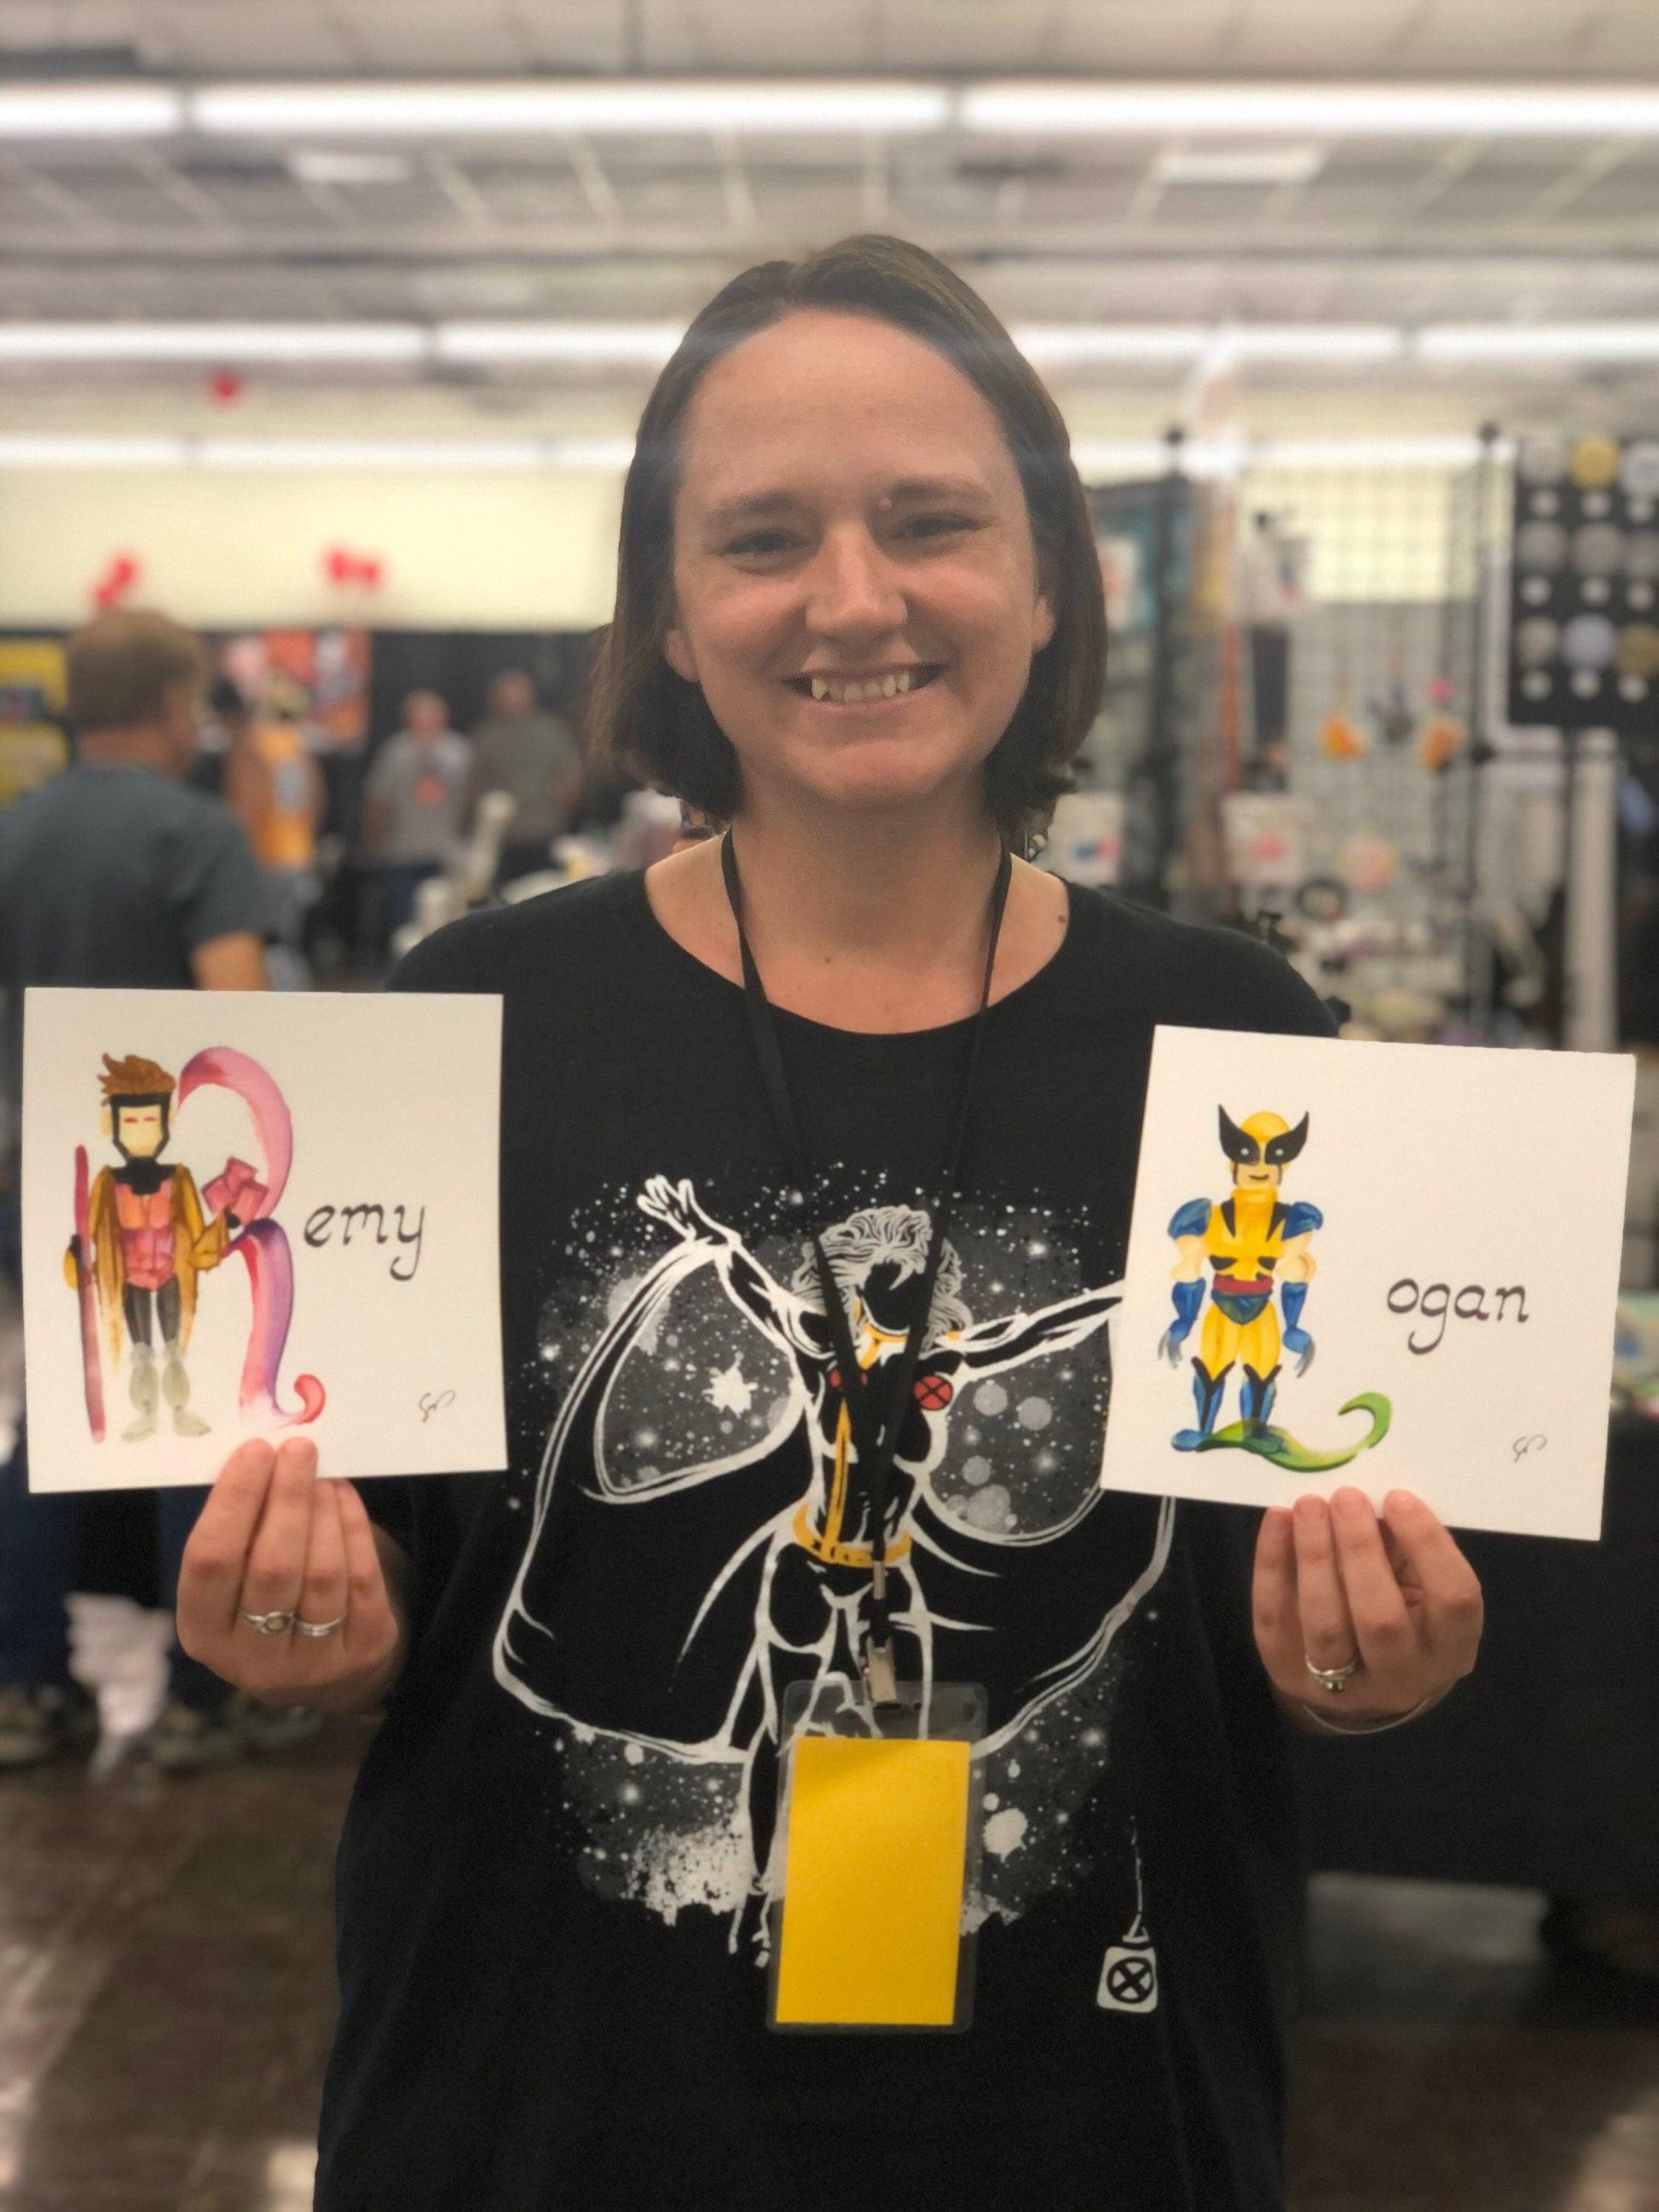 A very happy mama with two single painted character names featuring mutants with the names "Remy" and "Logan" taken at Bakersfield Comic Con